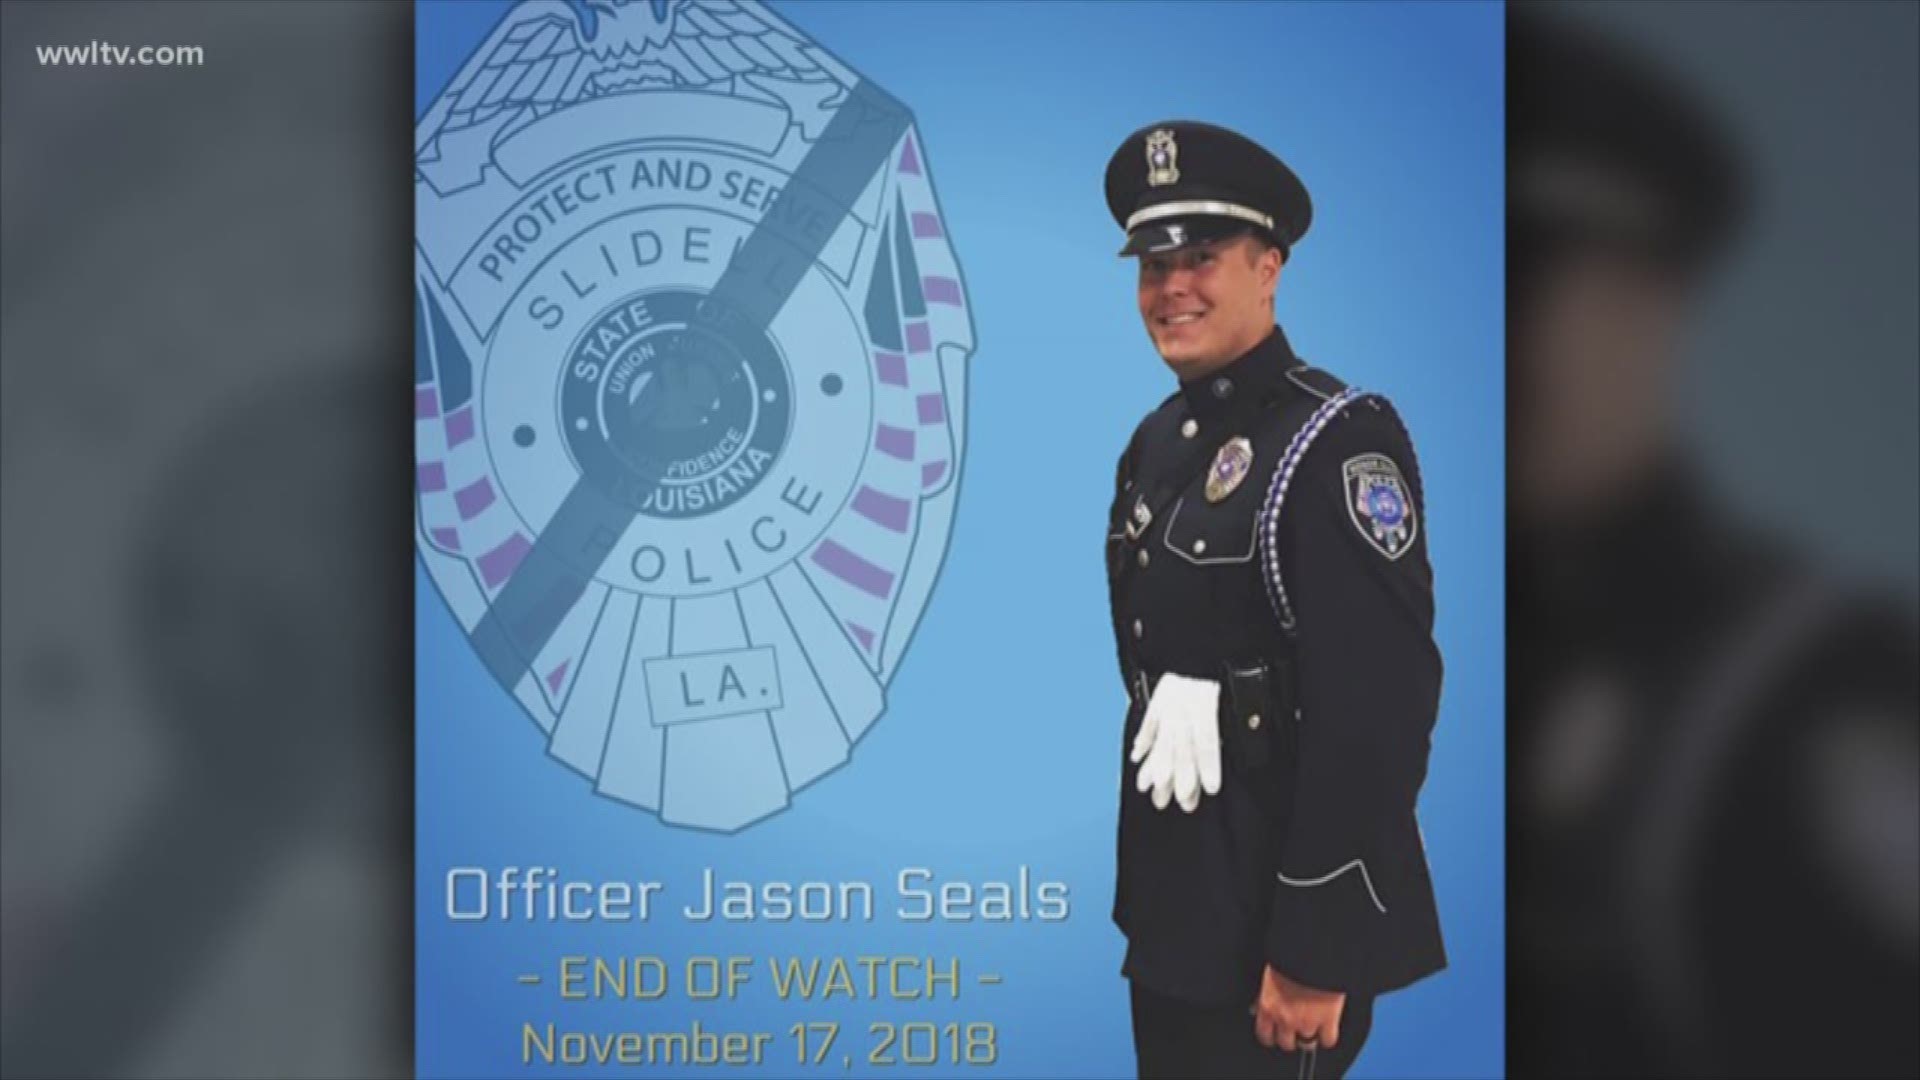 Slidell officer Jason Seals has succumbed to injuries he suffered while escorting a funeral procession while on his motorcycle.